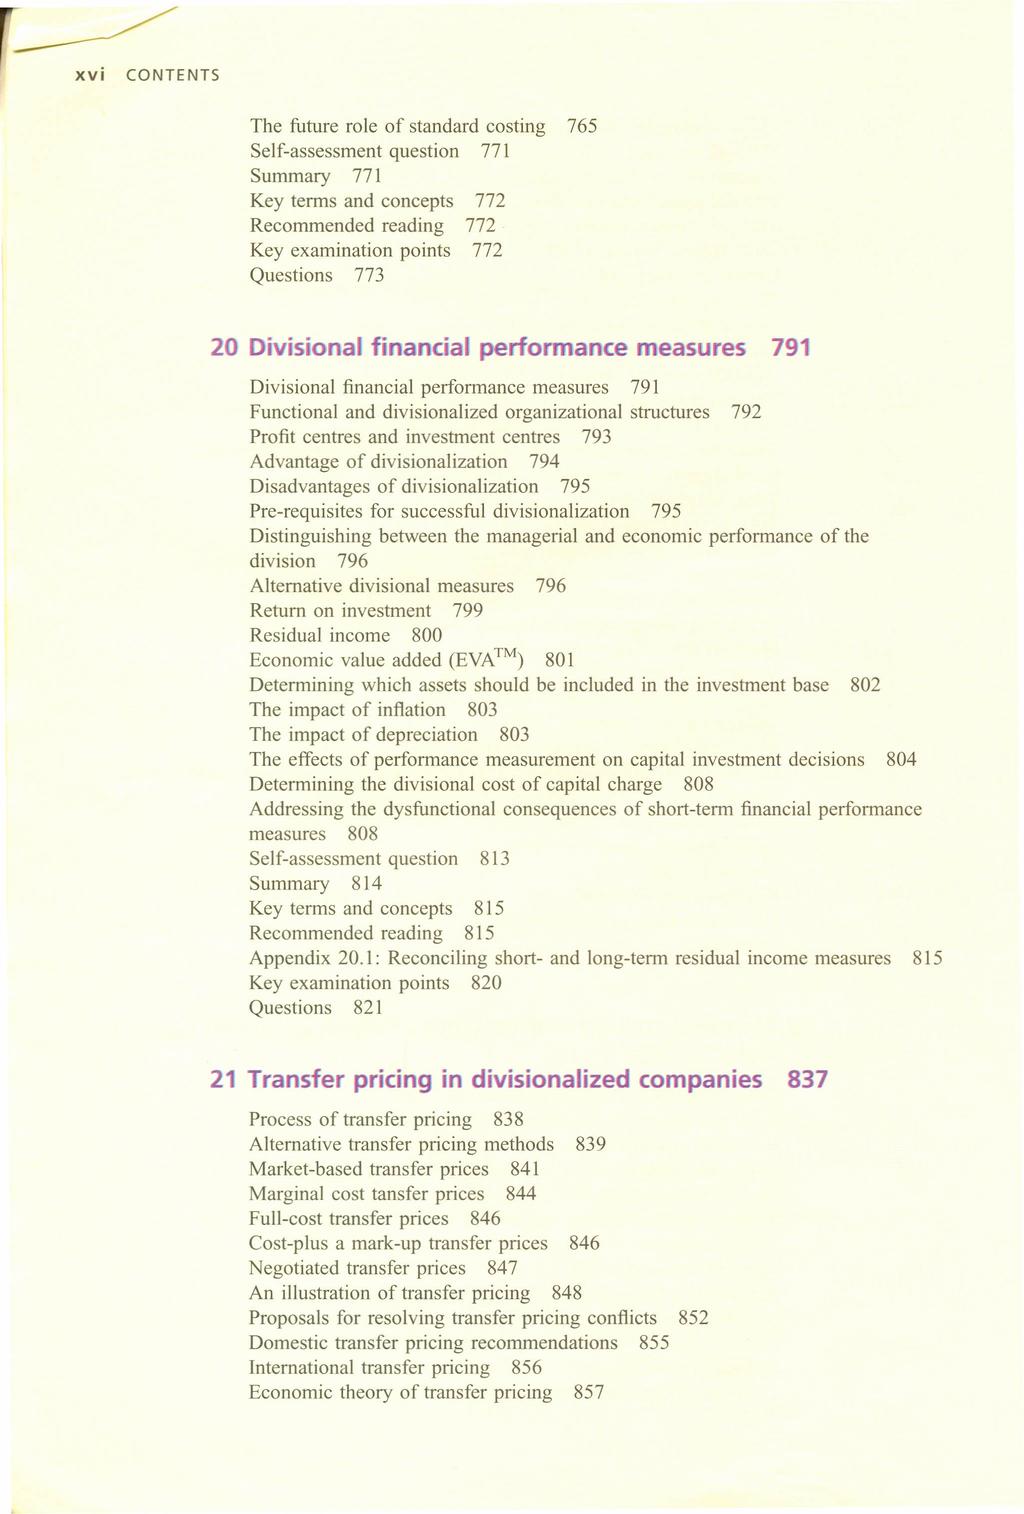 xvi CONTENTS The future role of standard costing 765 Self-assessment question 771 Summary 771 Key terms and concepts 772 Recommended reading 772 Key examination points 772 Questions 773 20 Oivisiona